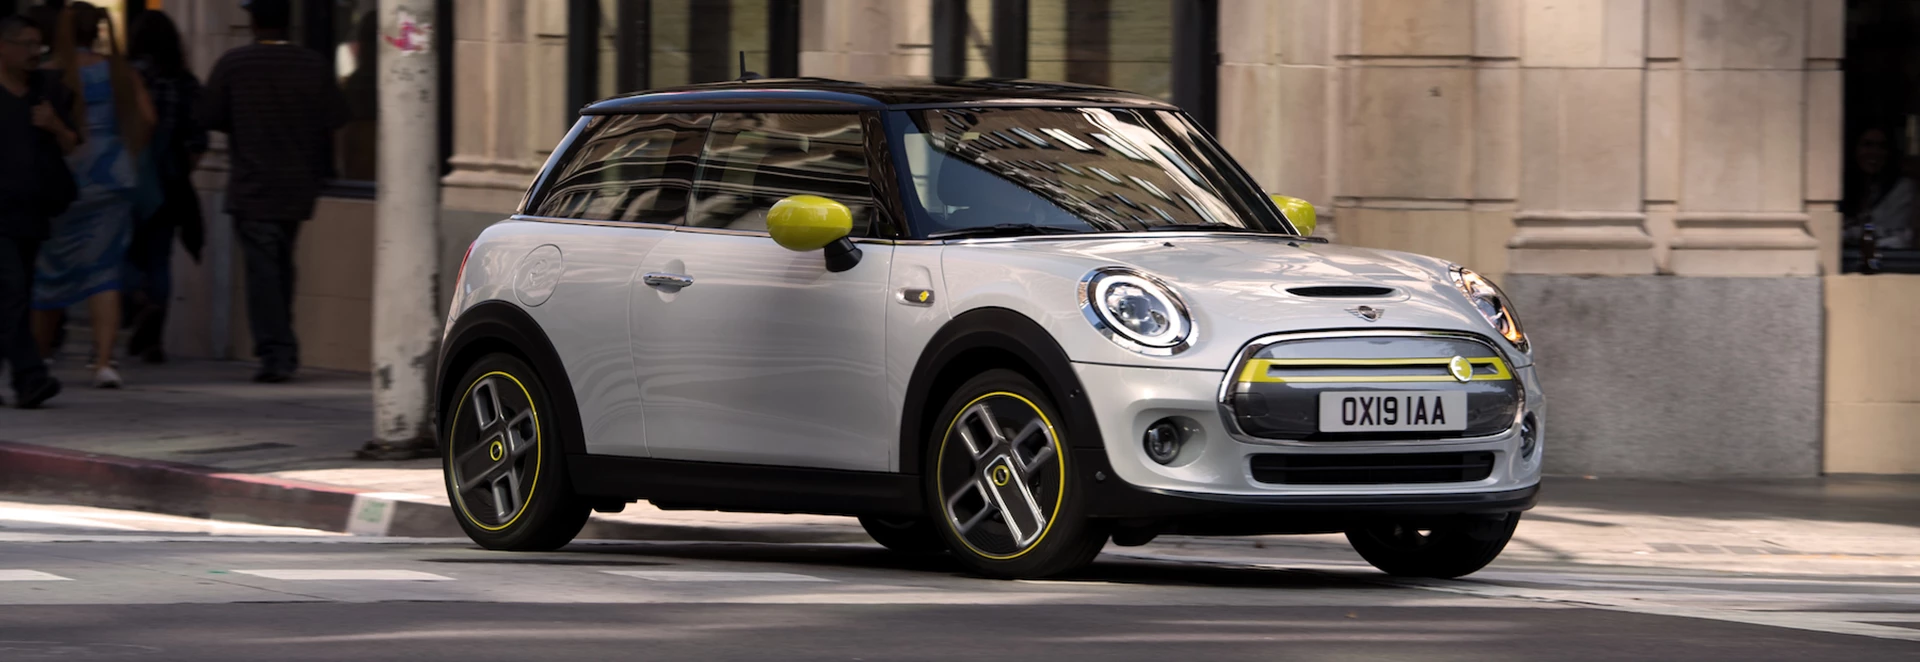 5 reasons why the Mini Electric is the perfect city EV 